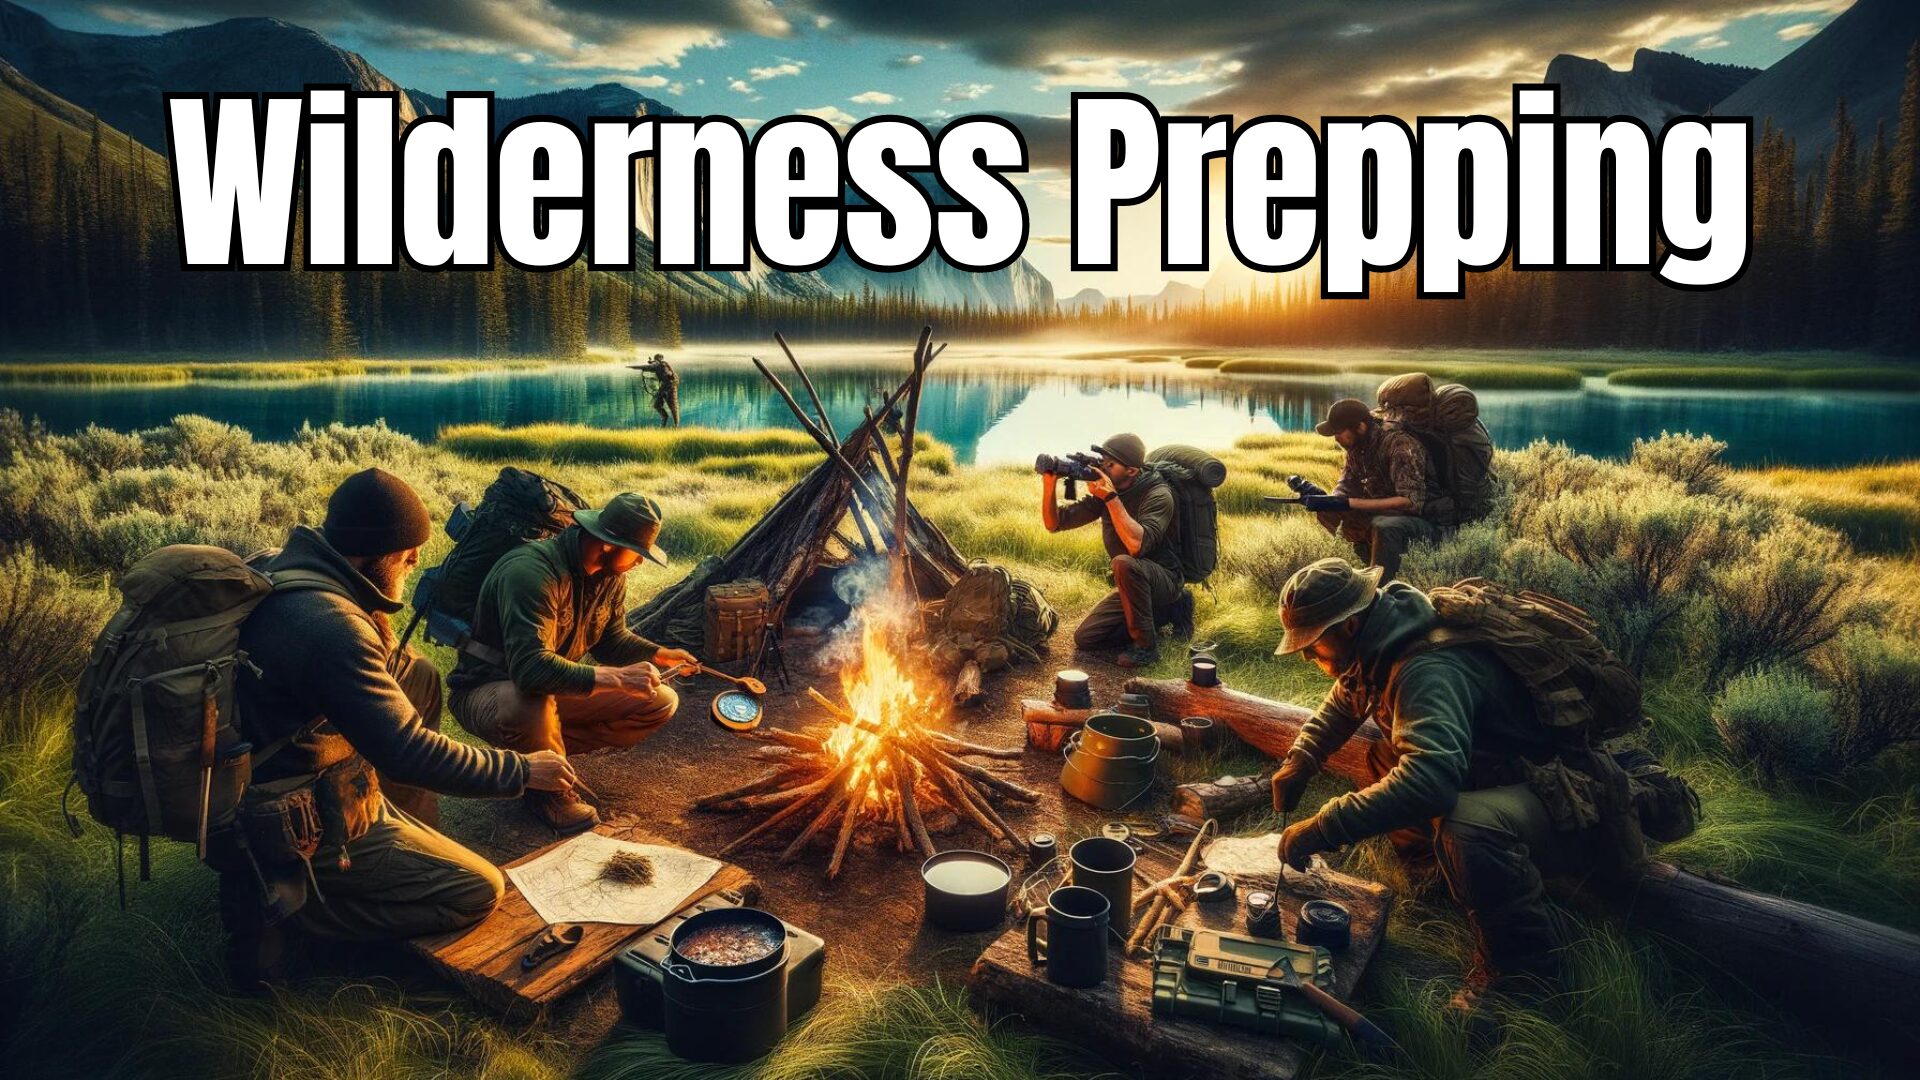 You are currently viewing Master Wilderness Prepping: Learn Wilderness Survival Skills